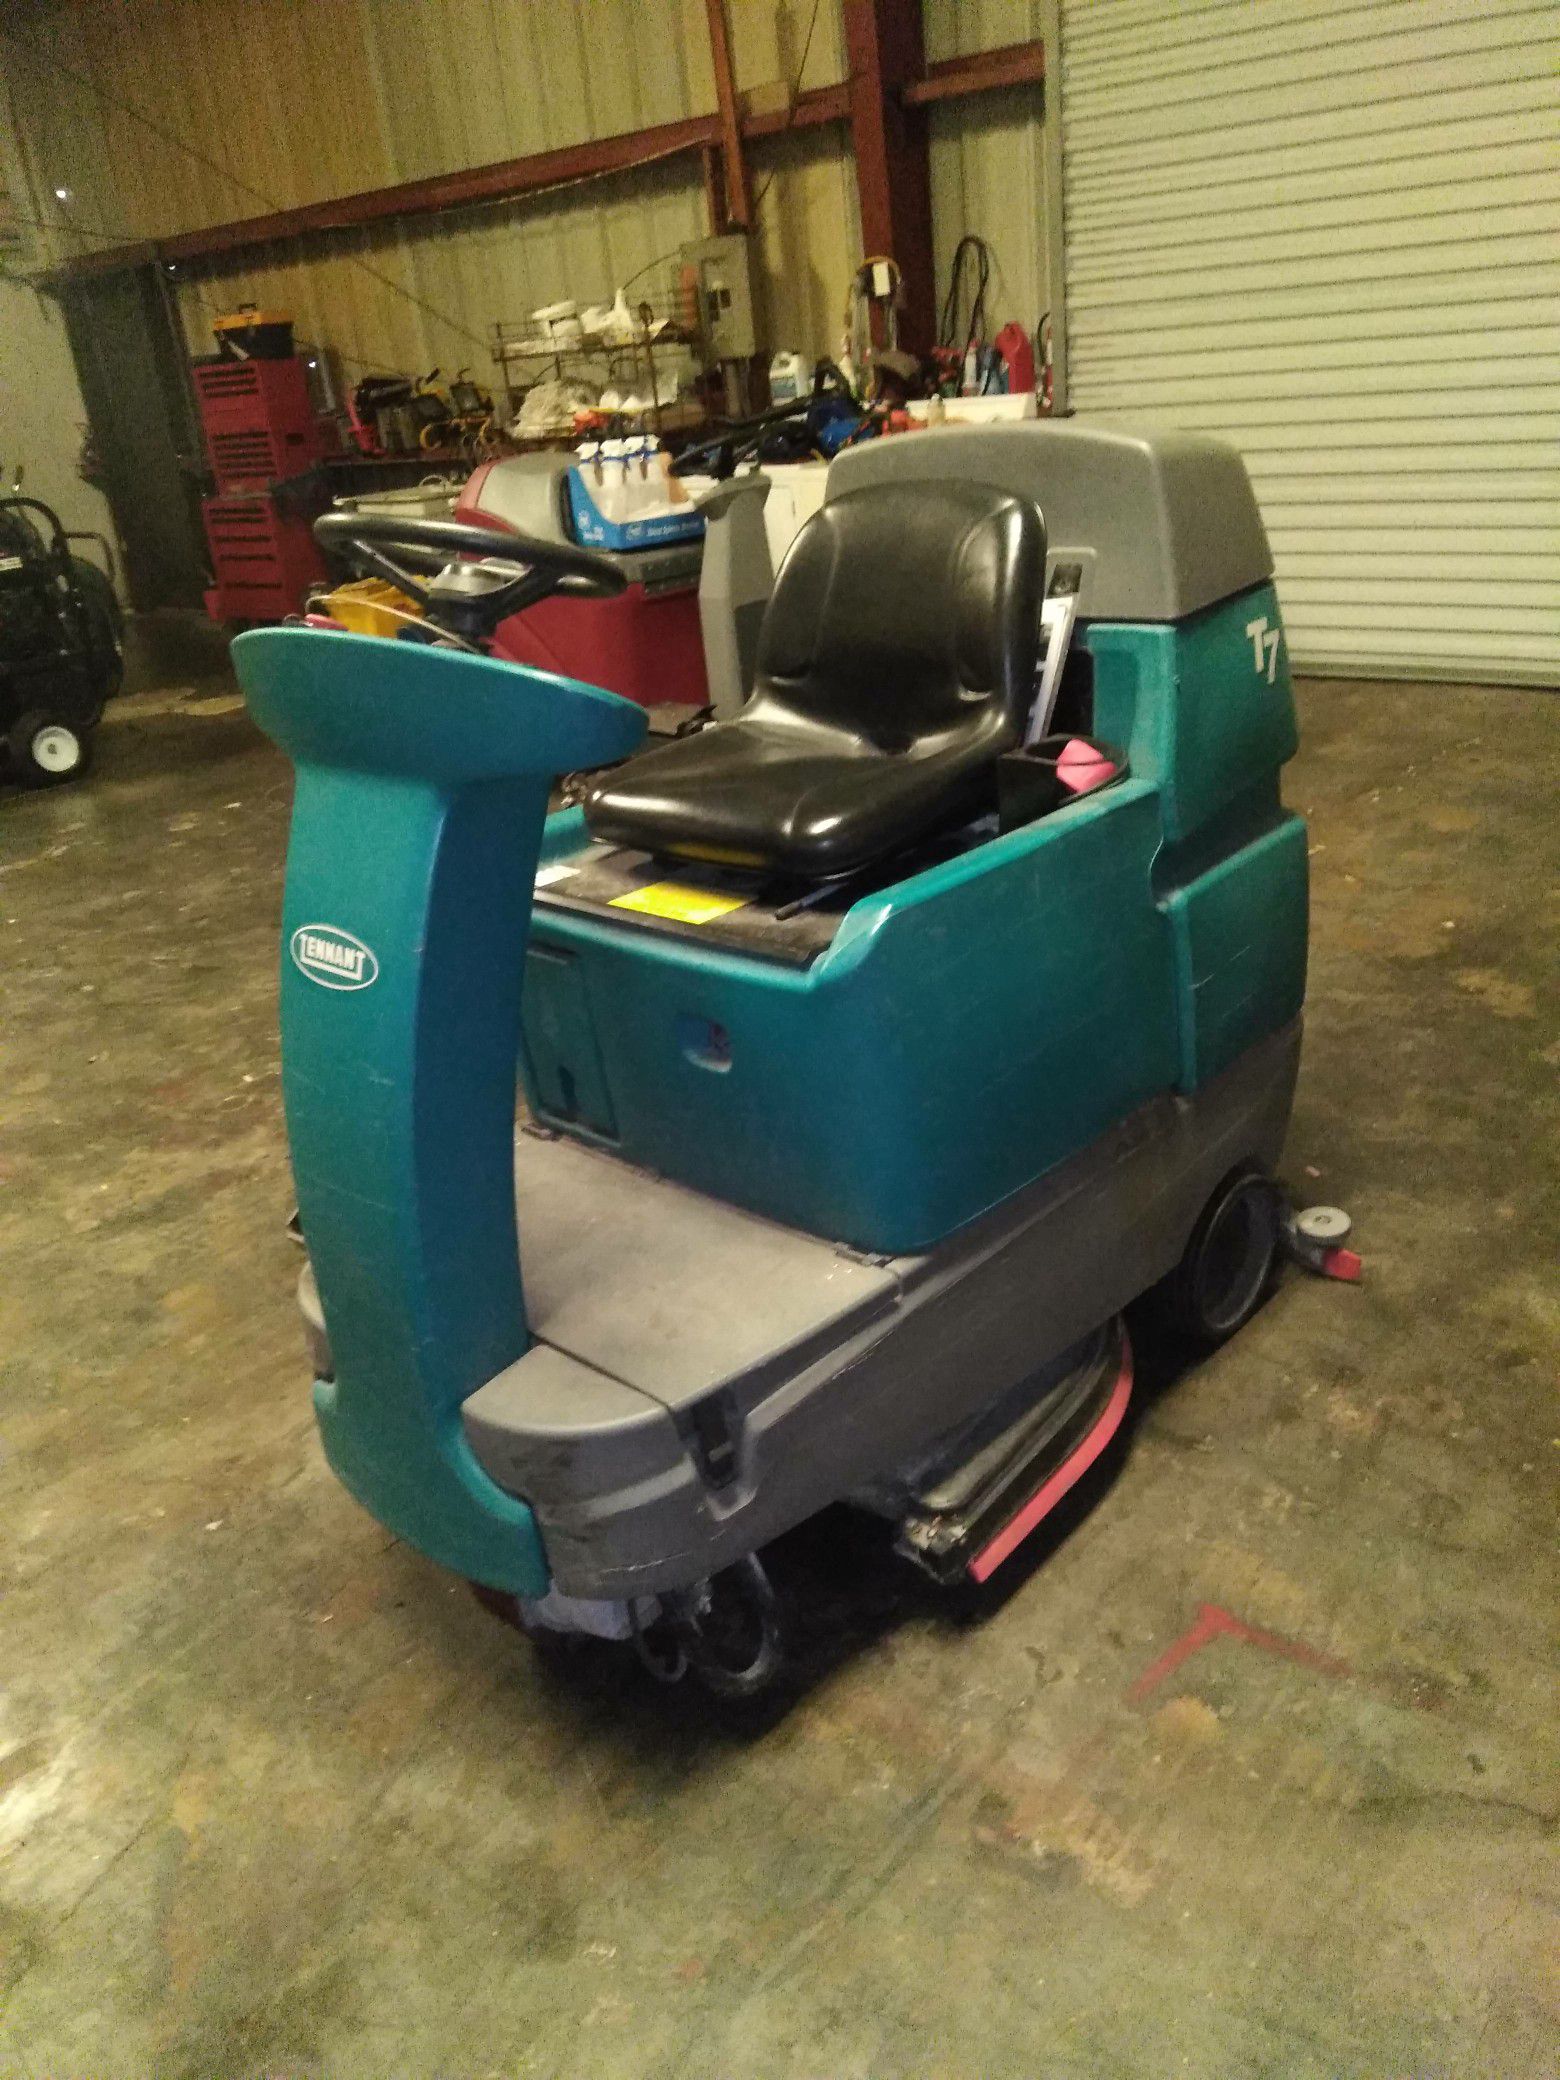 Floor scrubber. Tennant. Runs great batteries fairly new. New about $7500.00 to $9000.00 asking $3200.00. have five machines to sell